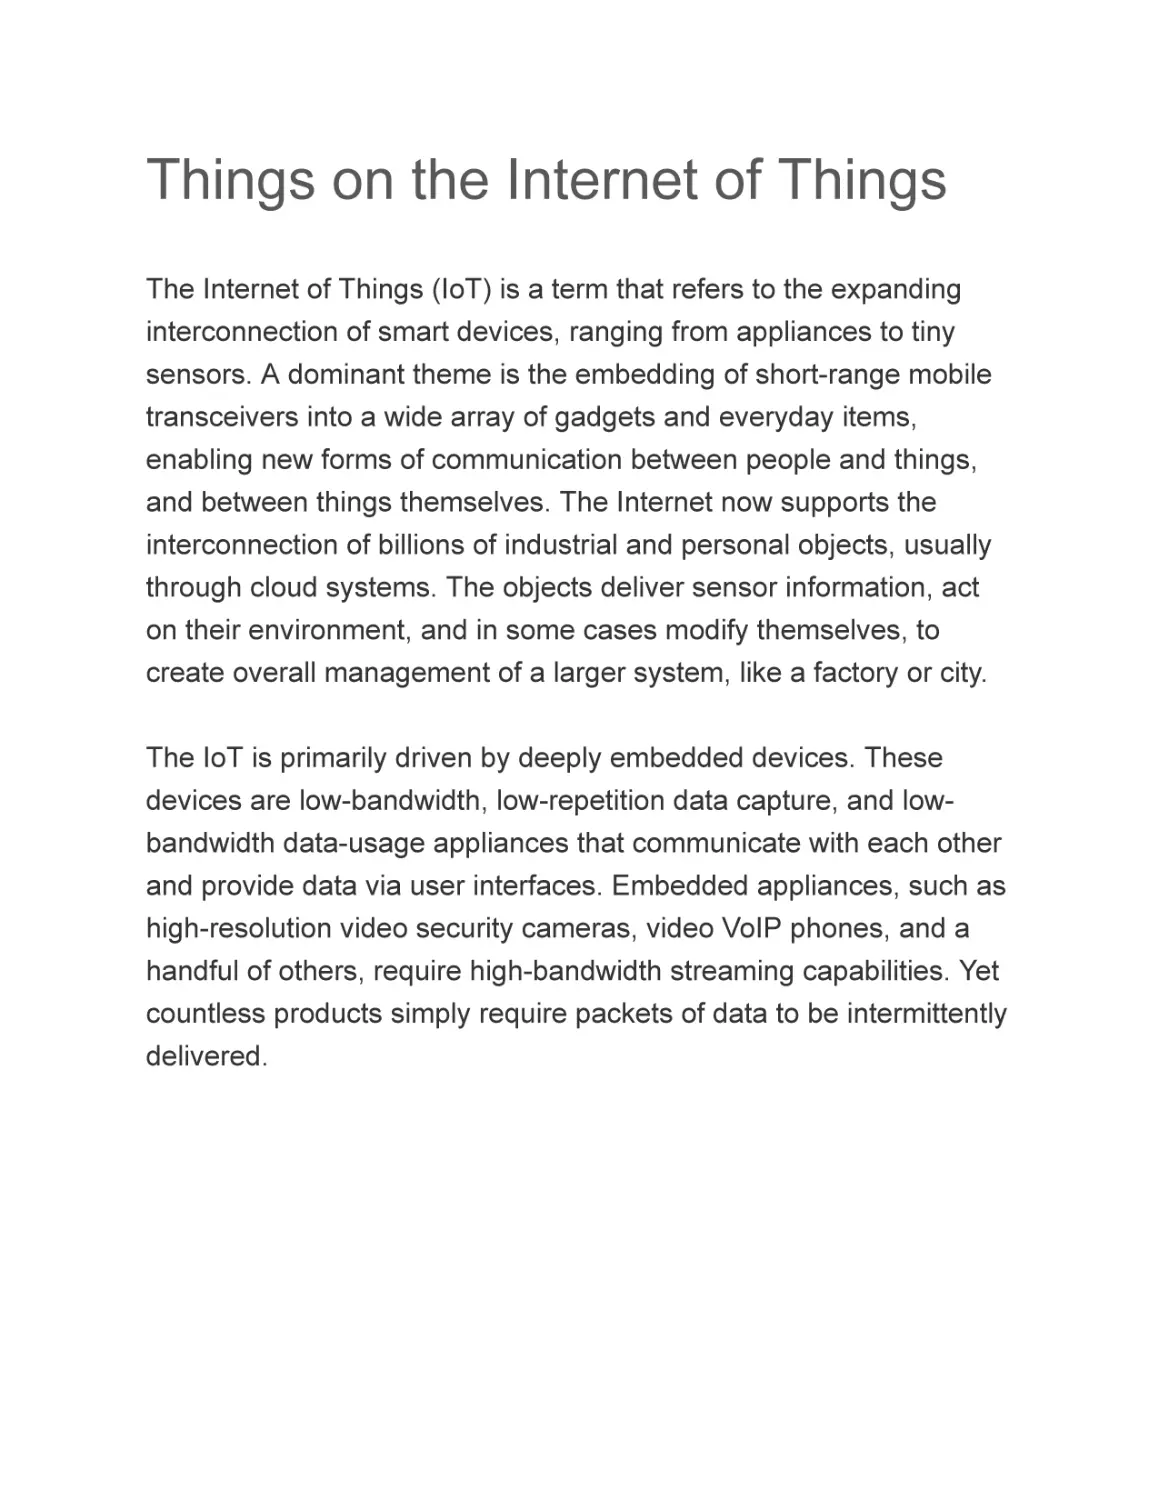 Things on the Internet of Things